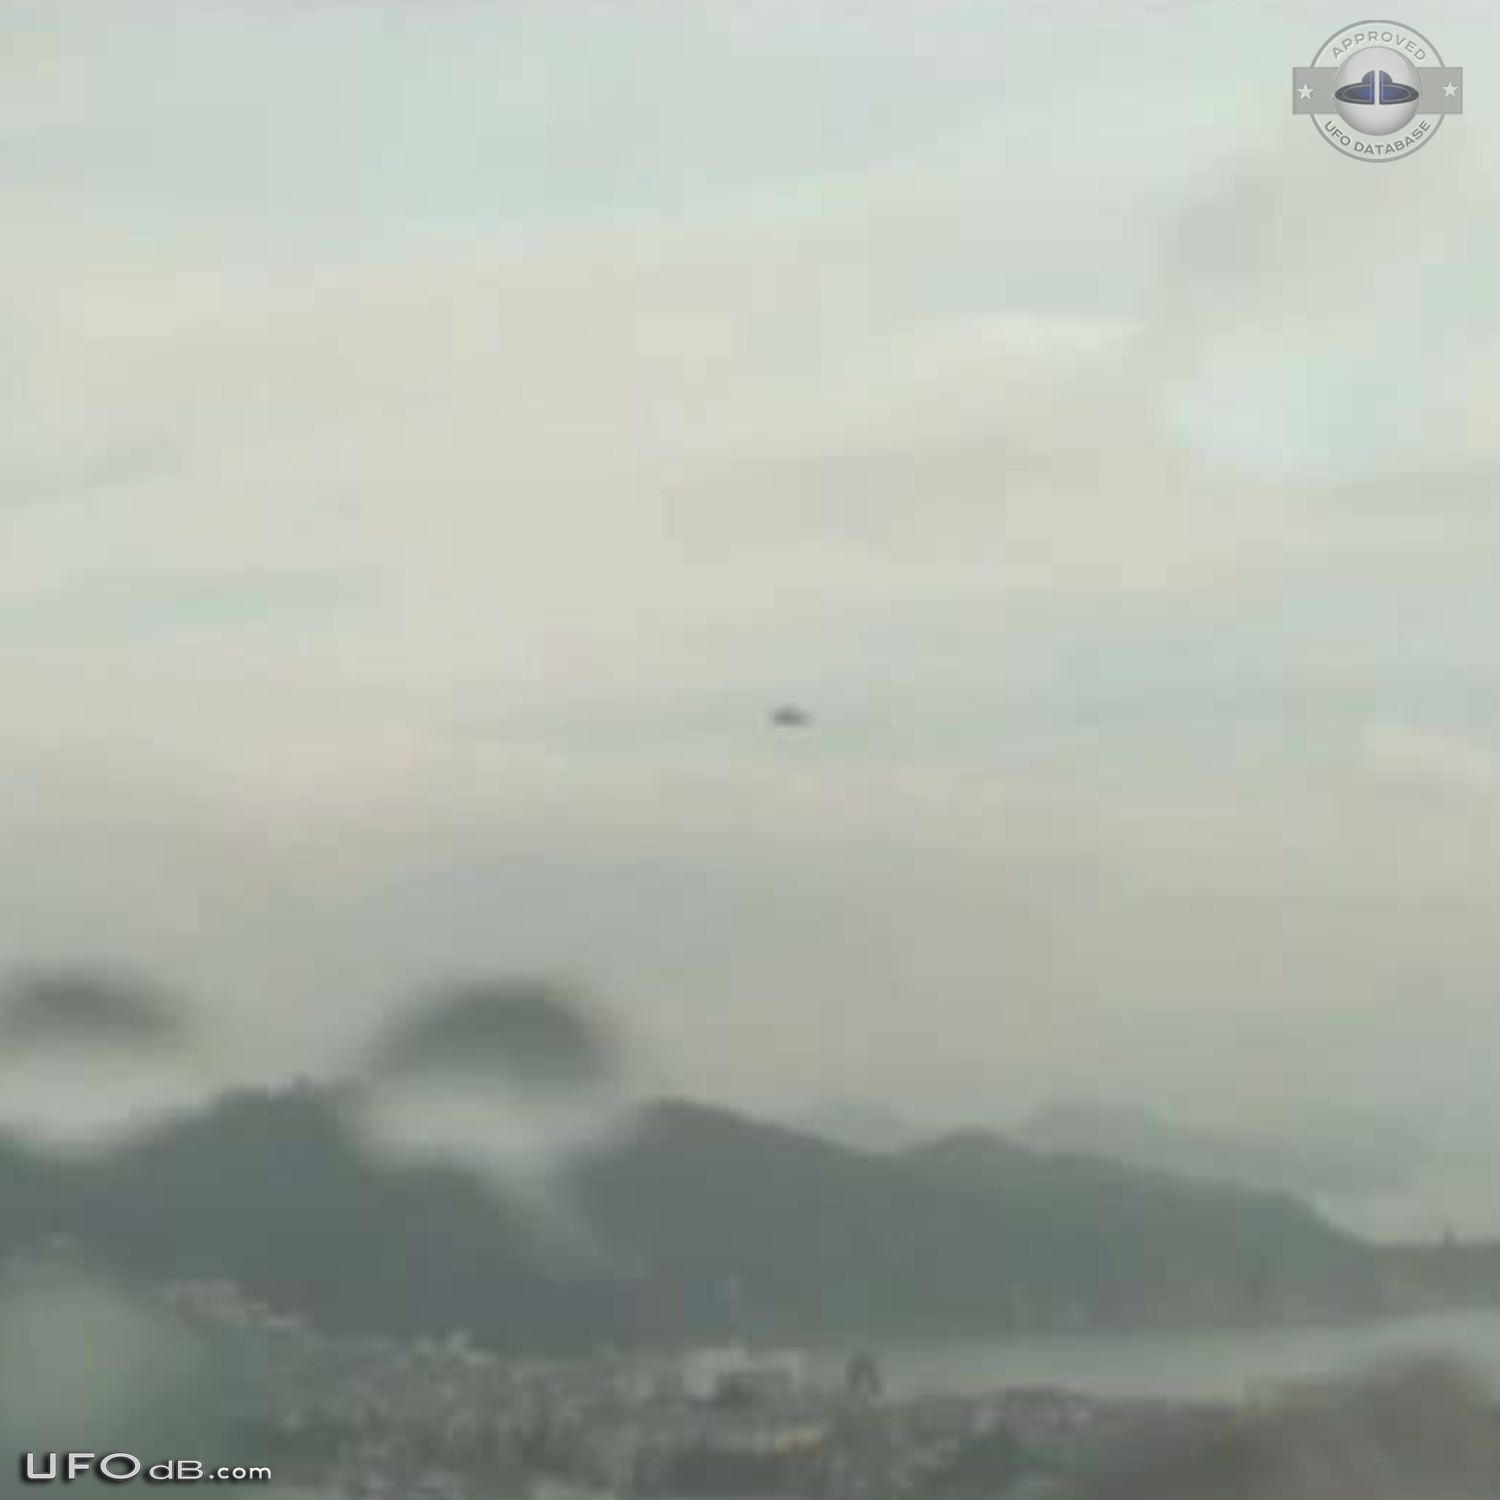 UFO caught on Picture by Hong Kong weather camera - April 2014 UFO Picture #567-3